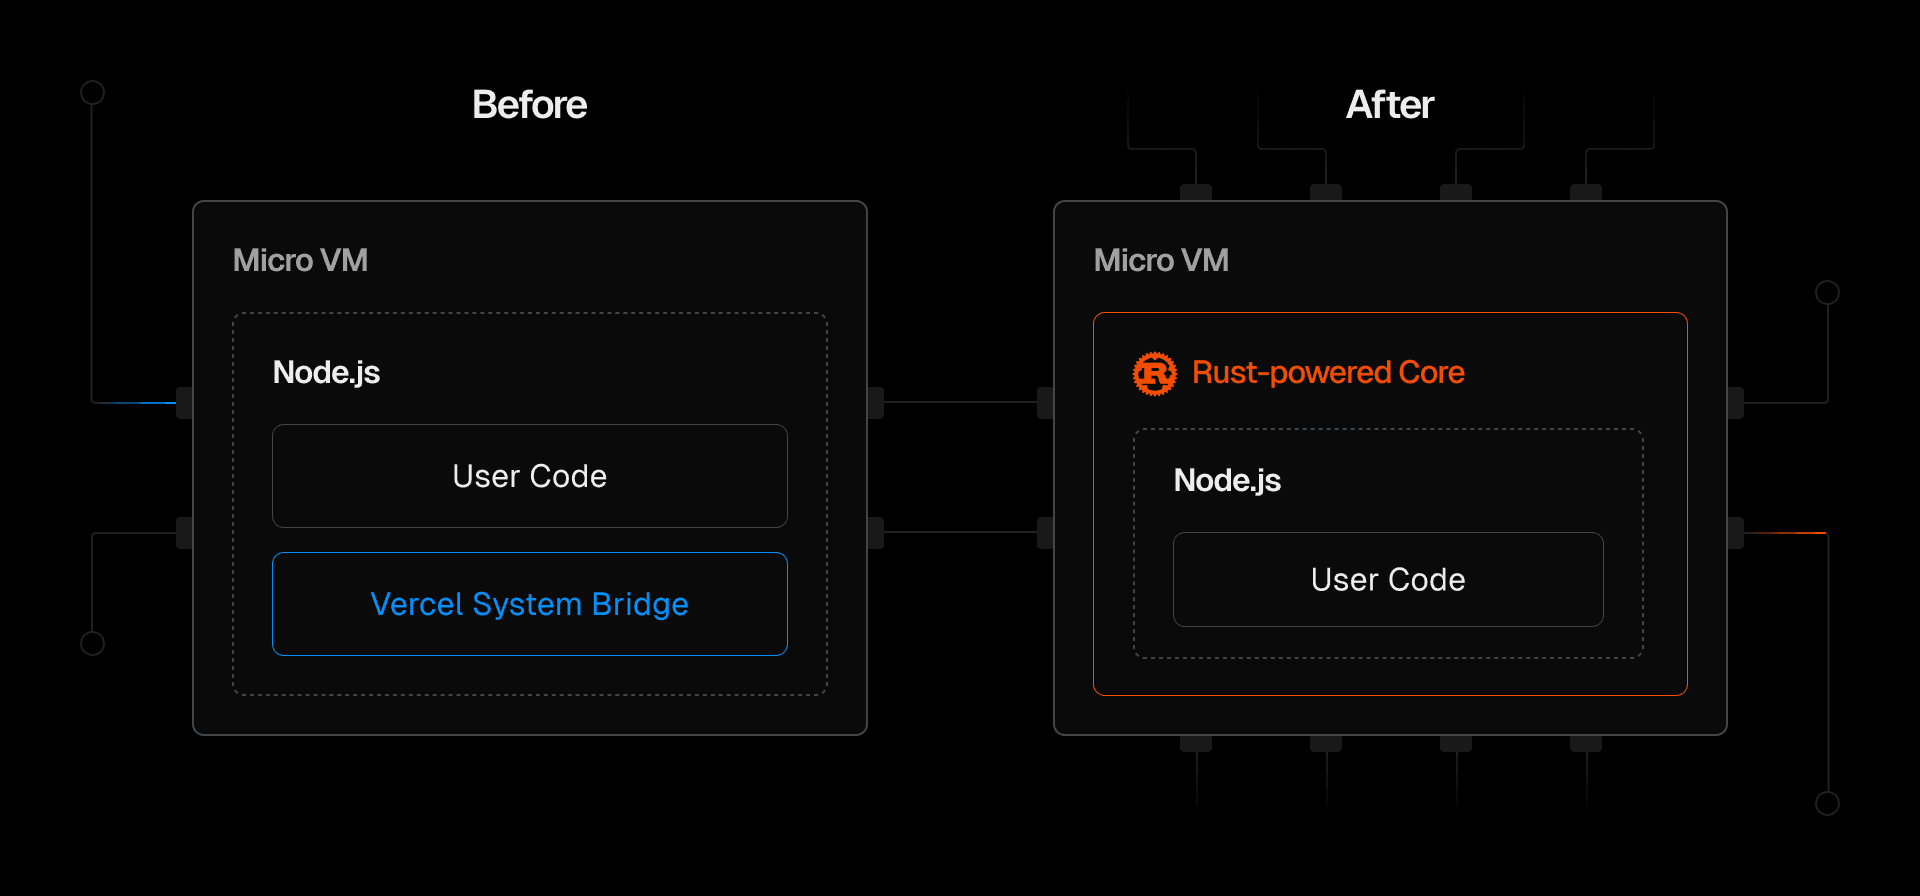 Up to 80ms faster (average) and 500ms faster (p99) for larger workloads by moving logic from Node.js to the new Rust-powered core.